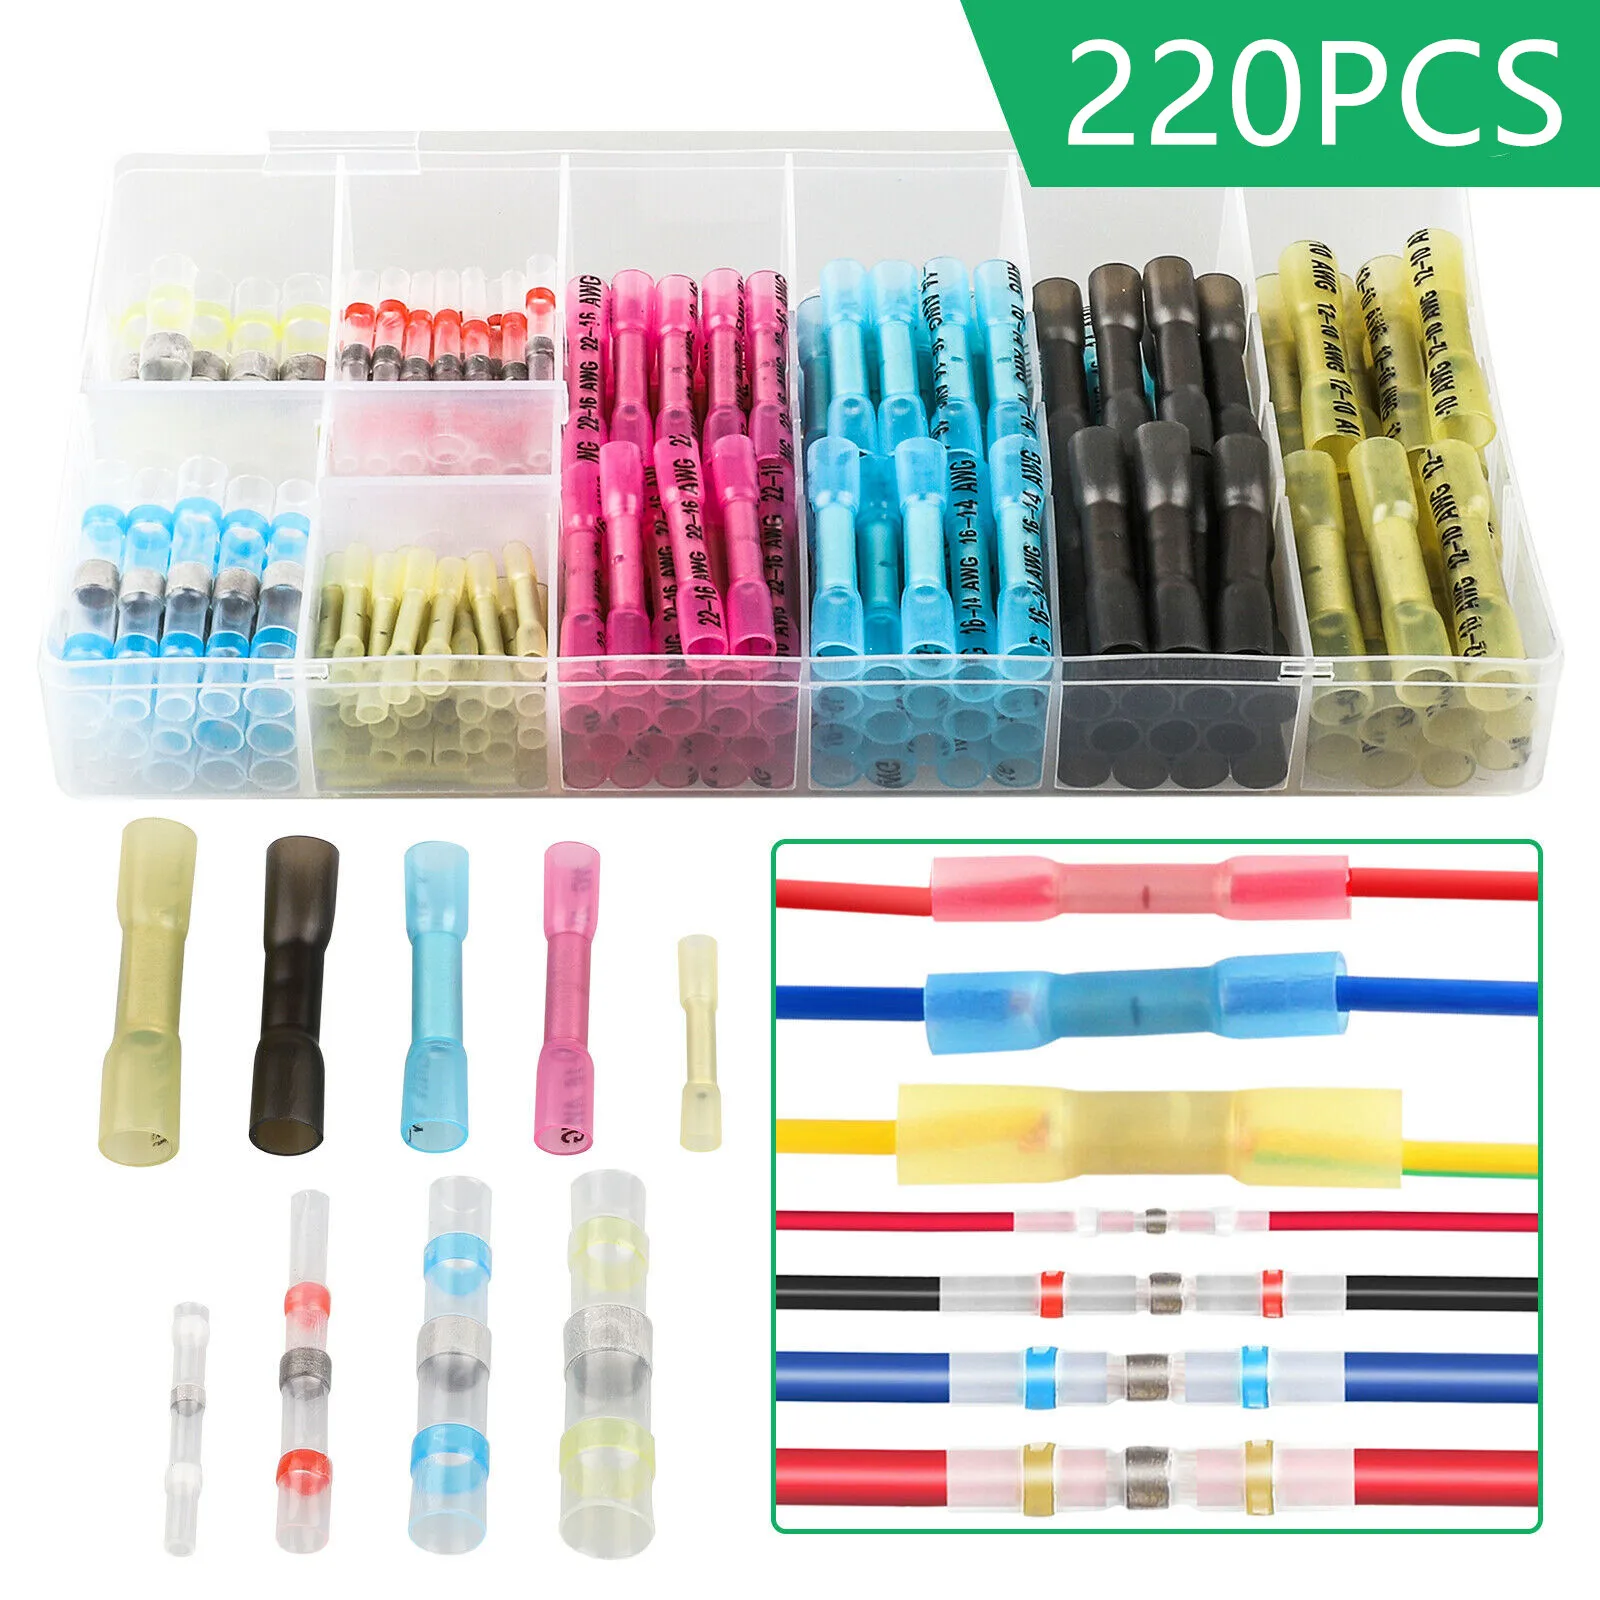 

220PCS Waterproof Heat Shrink Wire Connectors Electrical Insulated Solder Seal Connector Terminals 9 Sizes Assorted With Box